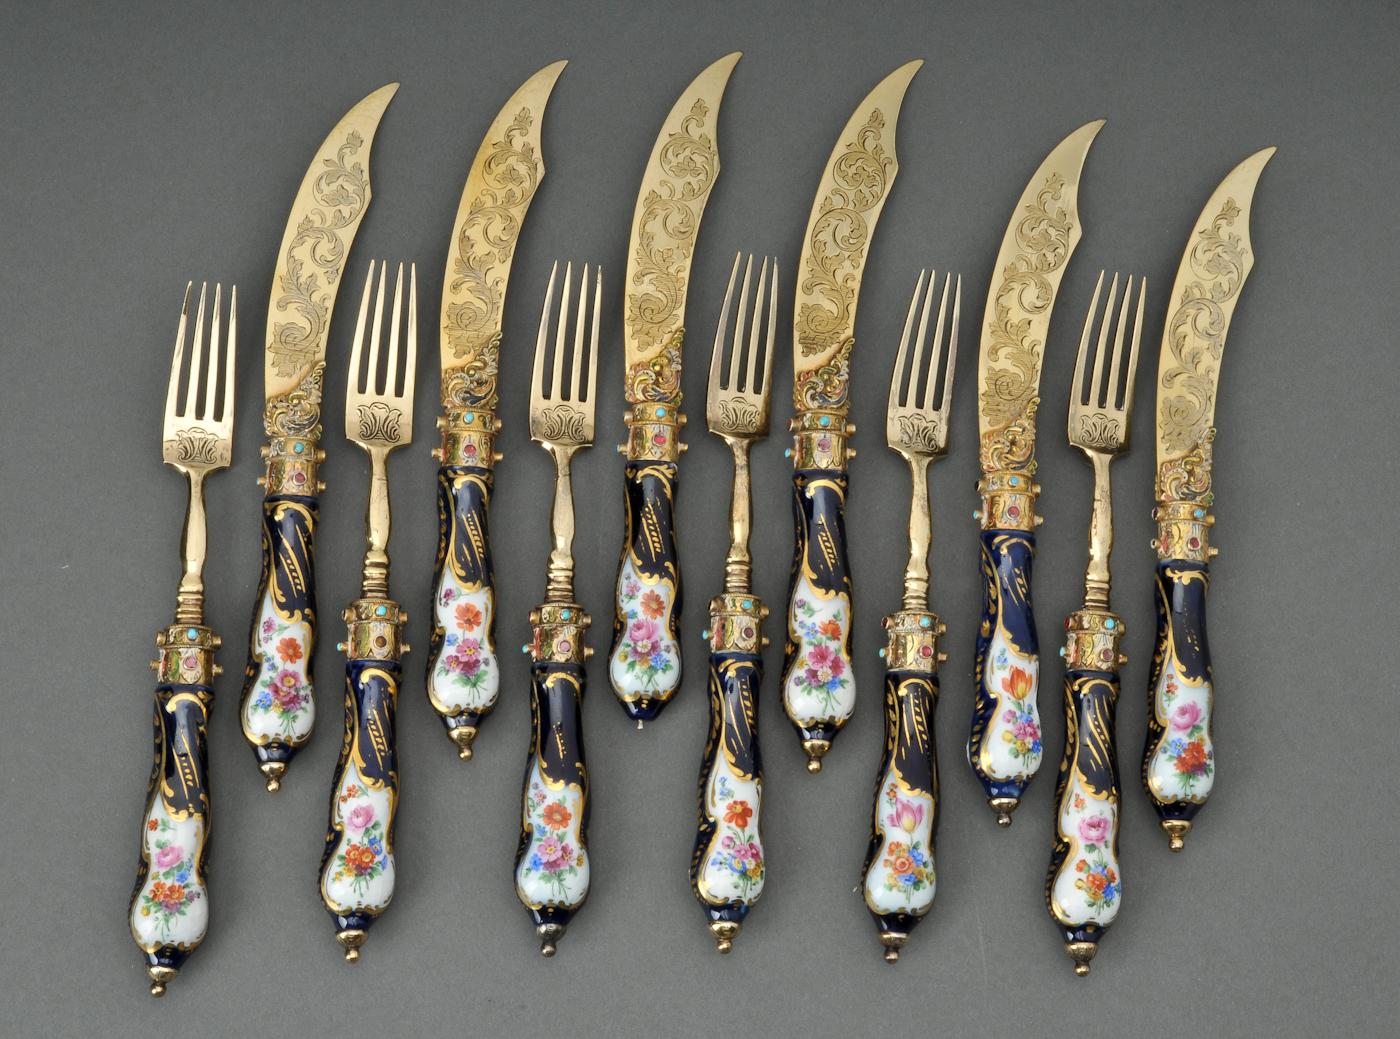 Antique Luxurious Bejeweled dessert 18K Gold Filled Silver flatware set in Renaissance style, comprising six knives and six forks in contemporary box. This set is one of a kind,custom made in Austrian-Hungarian Empire, ca. late 19th century. No